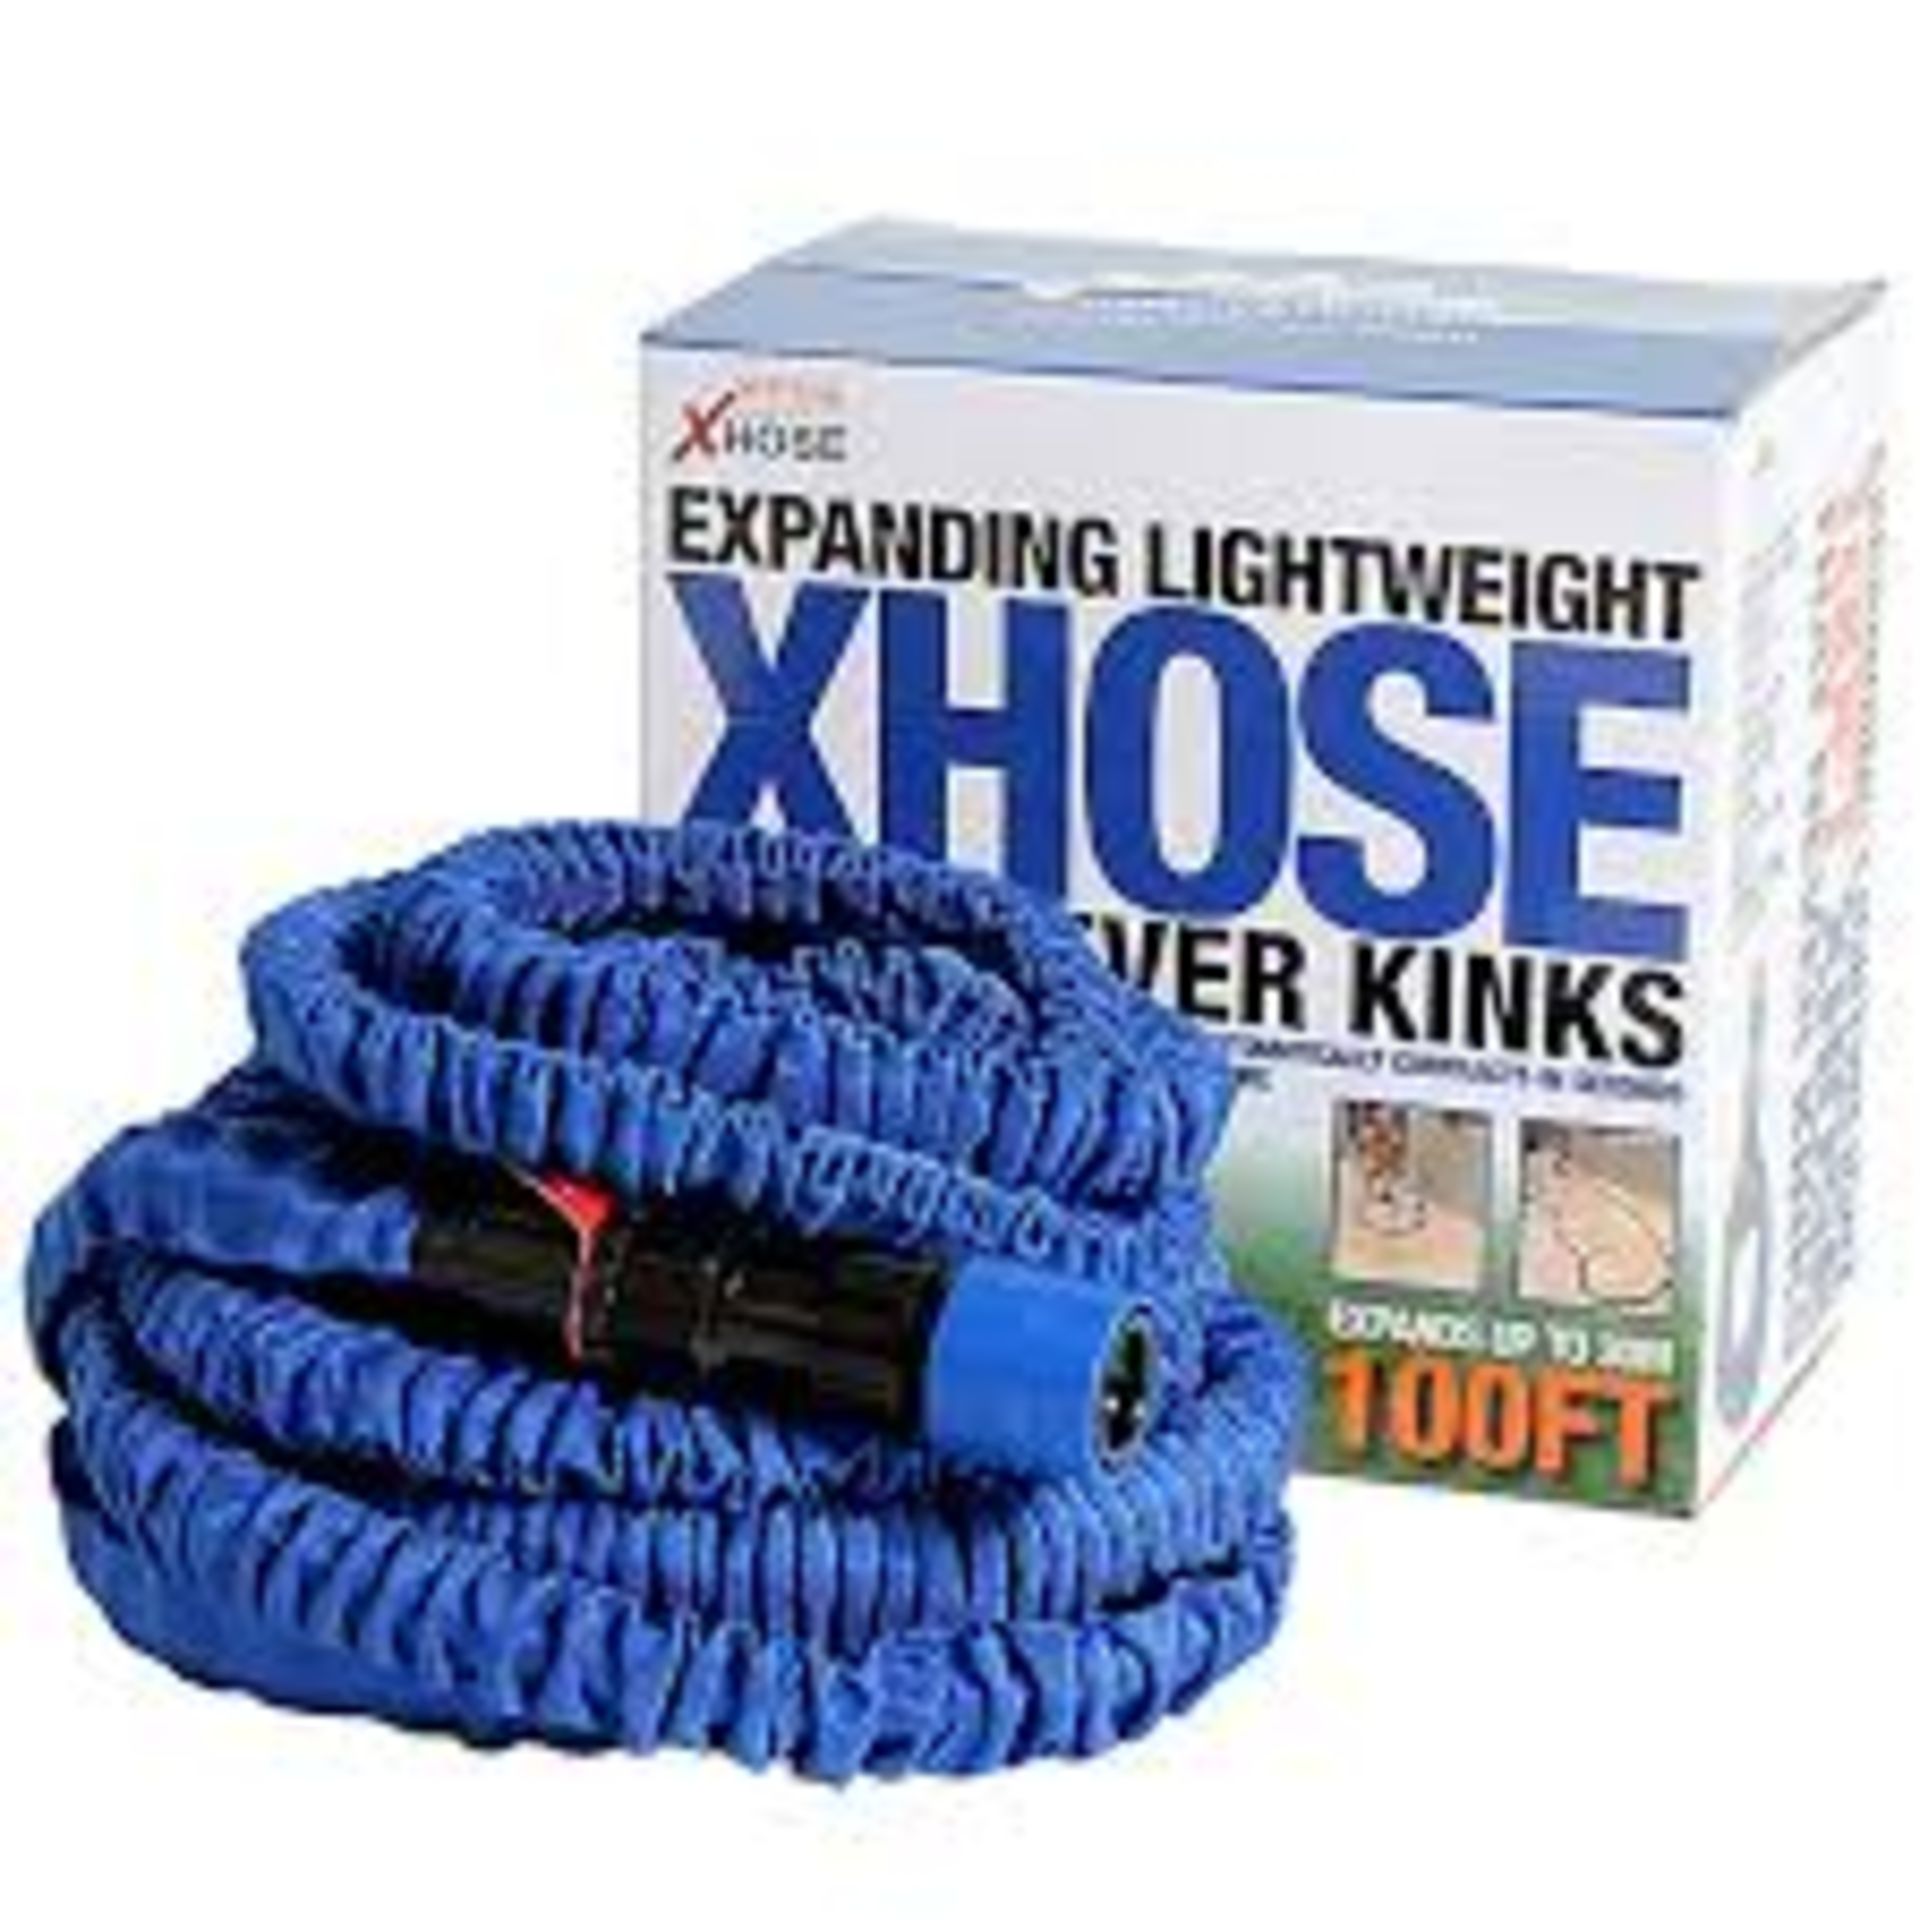 2 x XHose Expanding Hose 100ft. - S2BW. Our Bestselling XHose is the incredible, super-strong, ultra